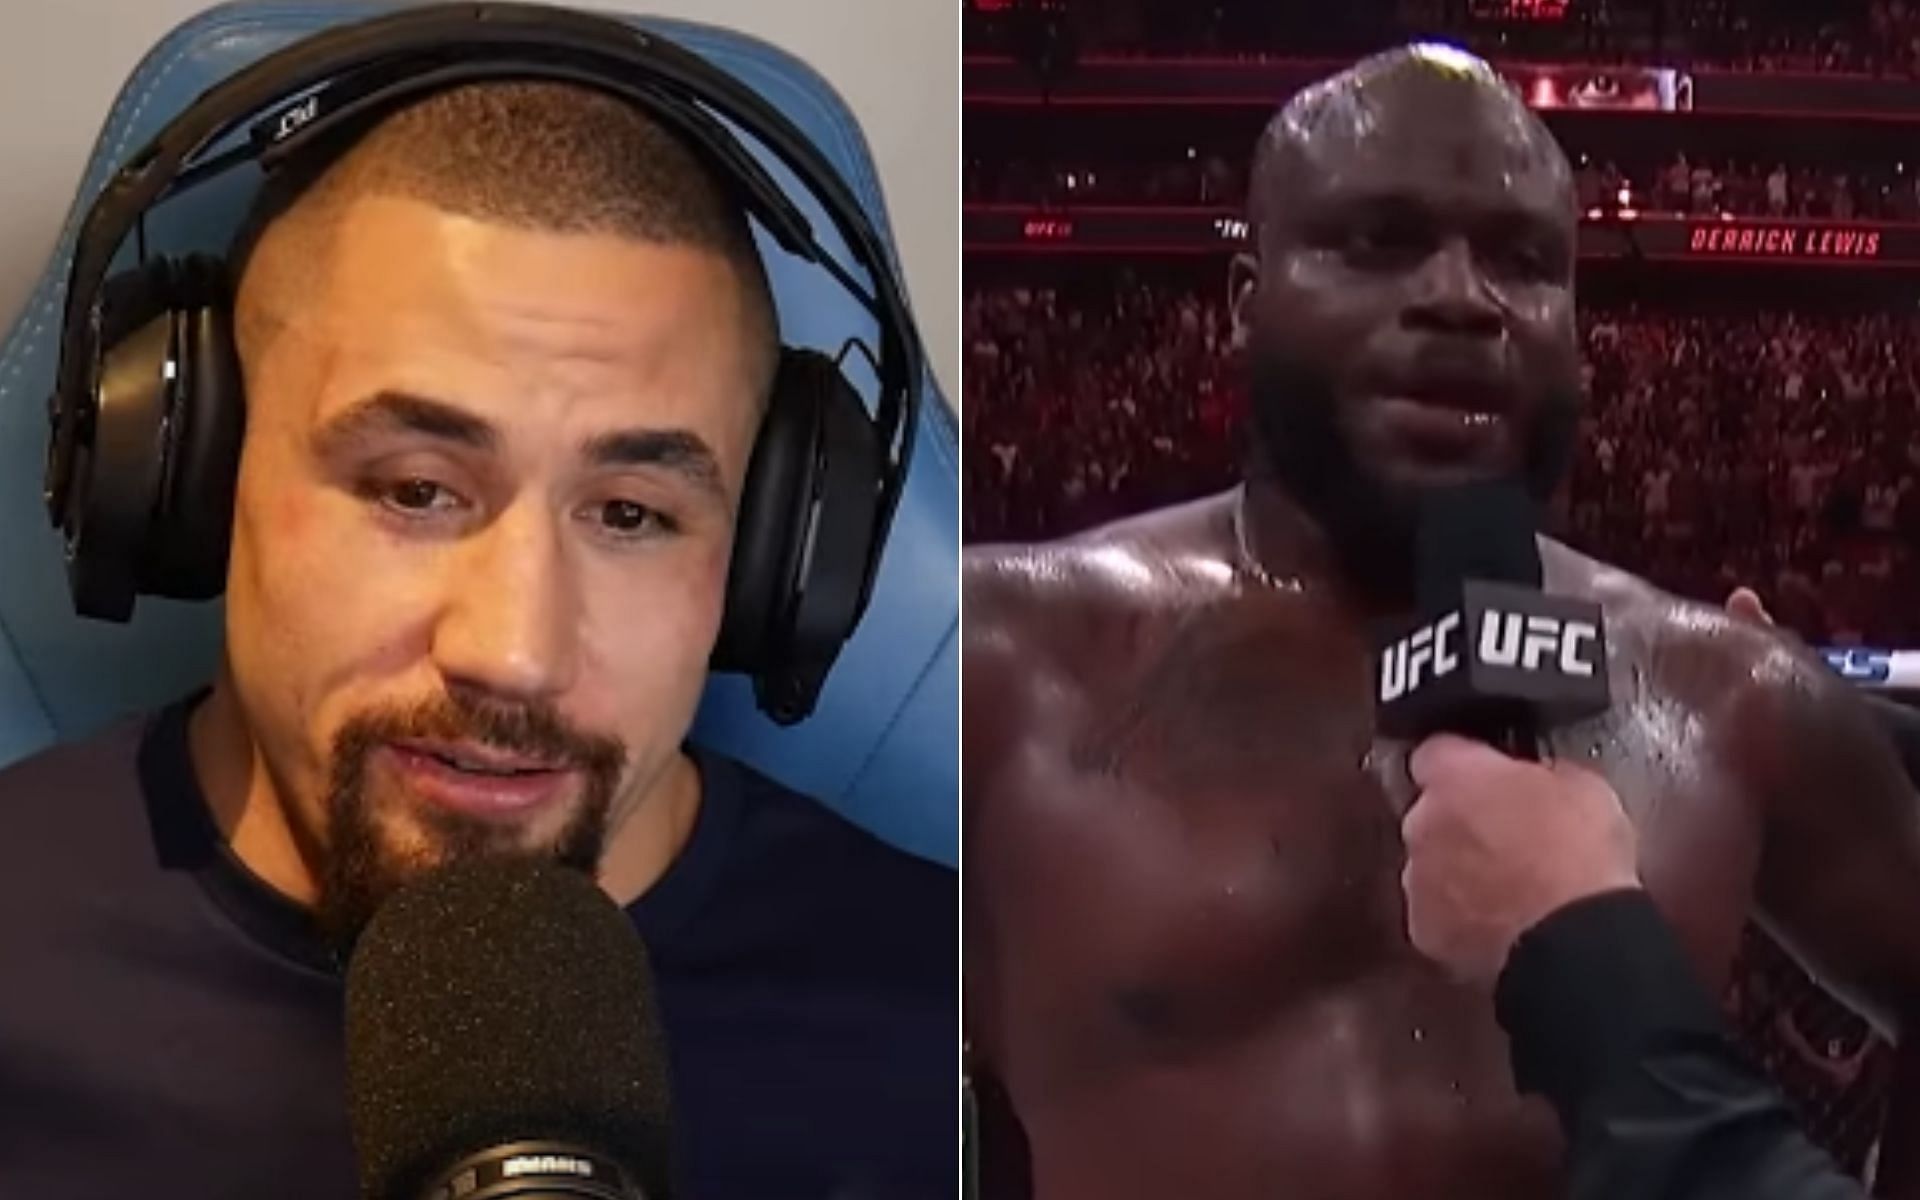 Robert Whittaker [Left], and Derrick Lewis [Right] [Photo credit: MMArcade Podcast and UFC - YouTube]